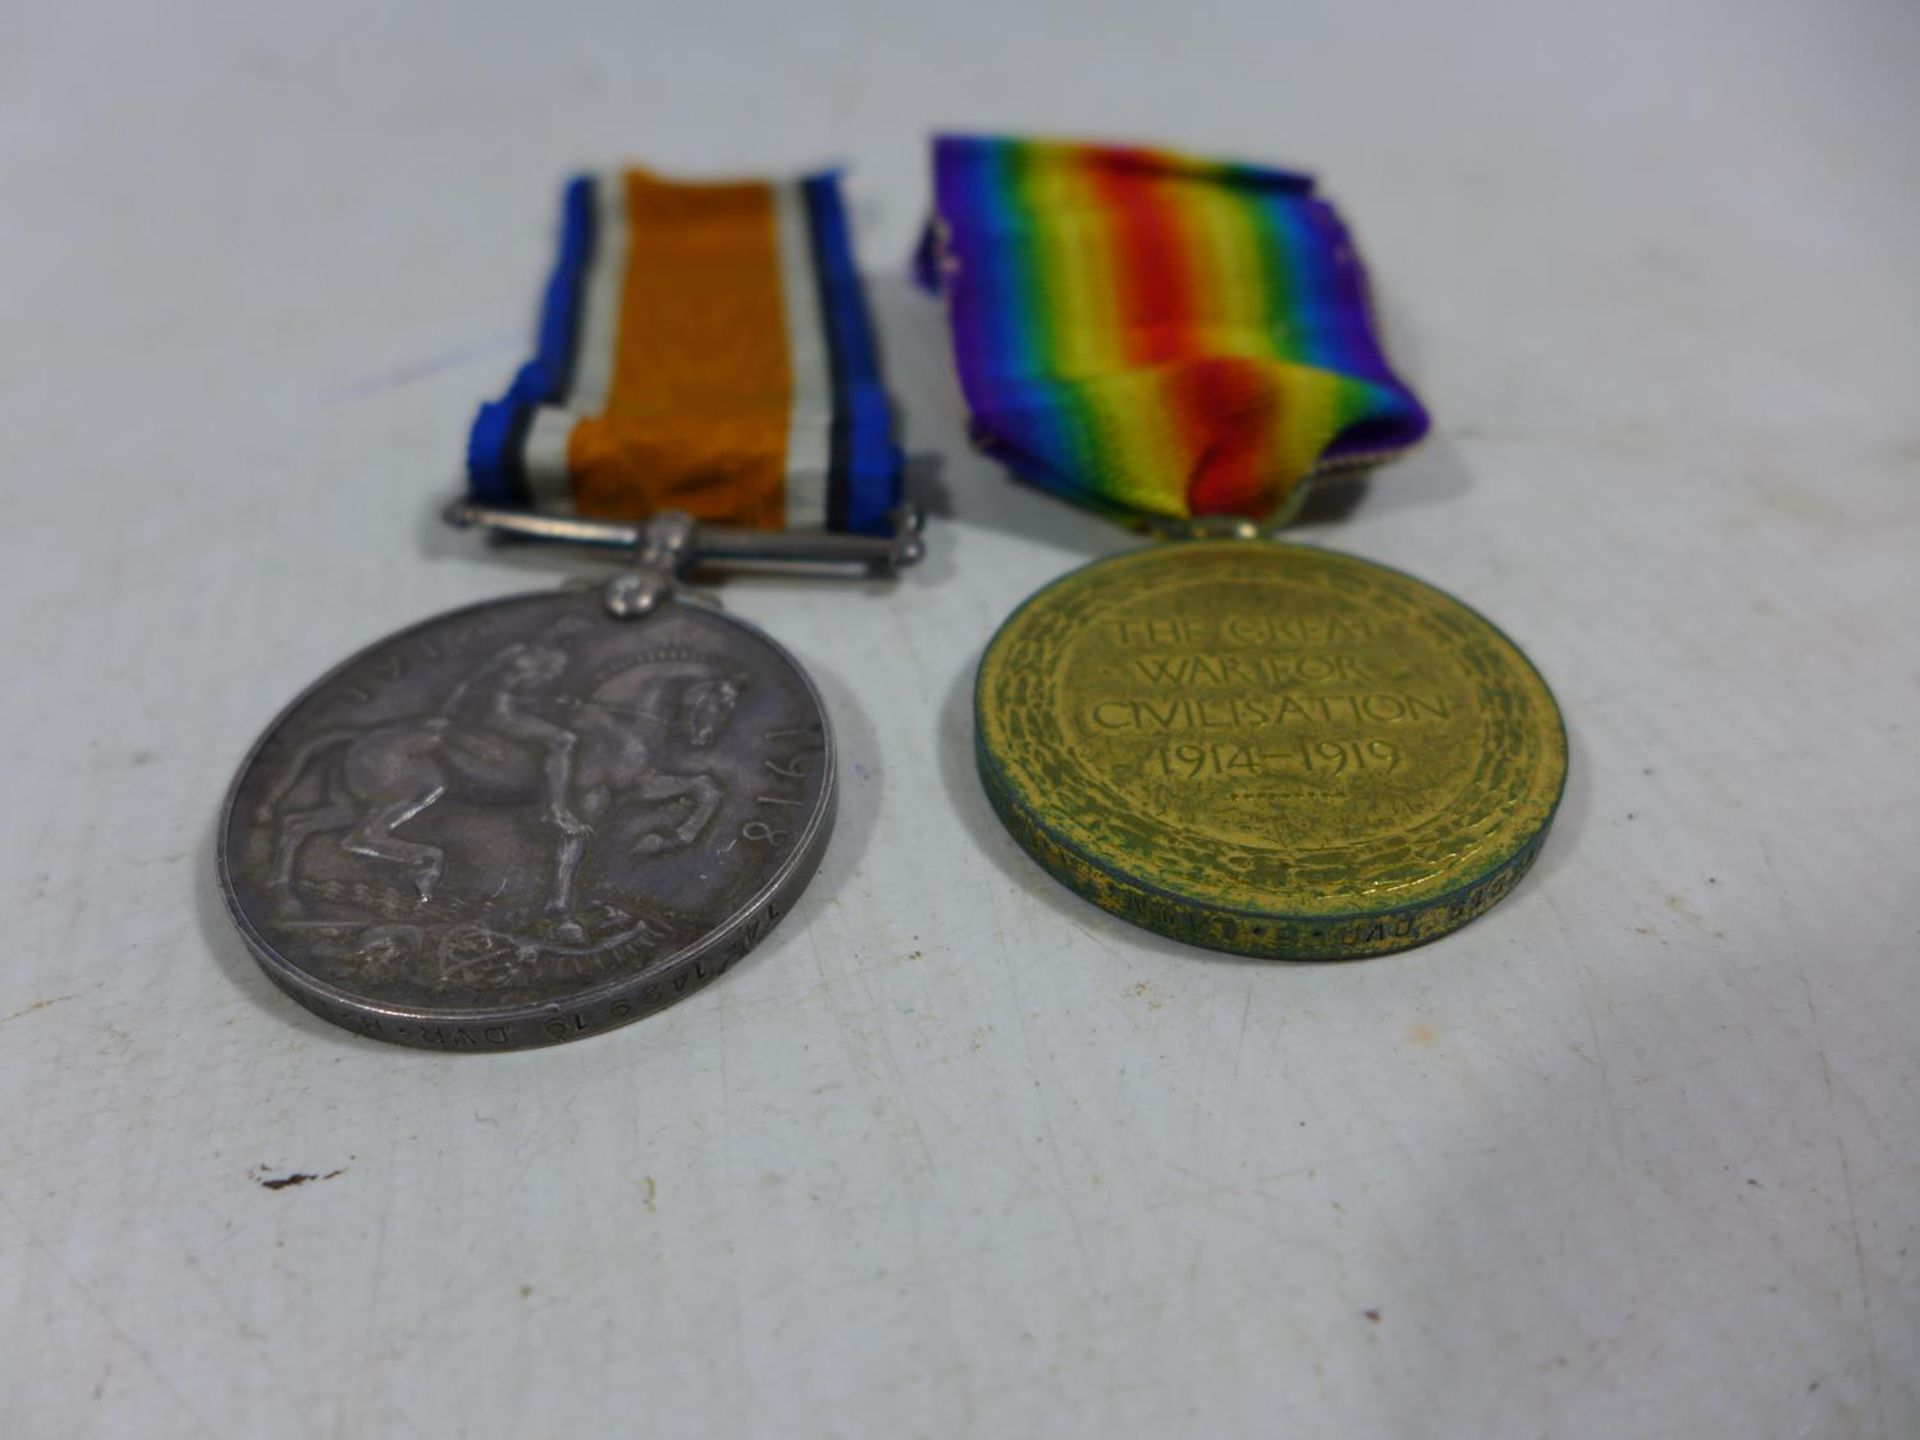 A WORLD WAR I MEDAL PAIR AWARDED TO T4 142919 DRIVER B LAWN ARMY SERVICES CORPS - Image 2 of 2